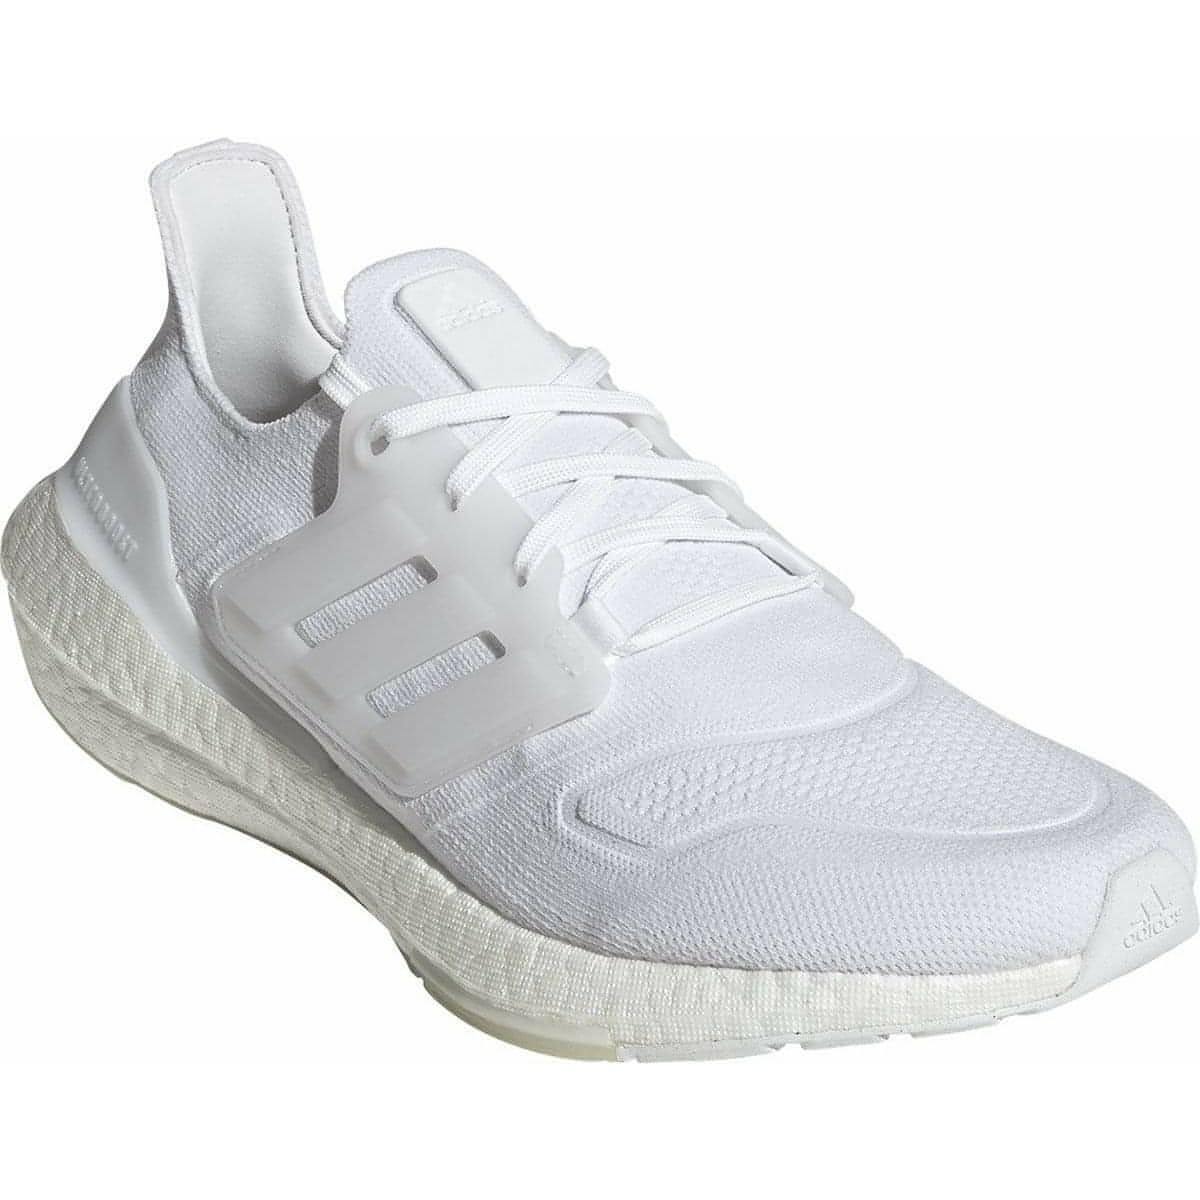 adidas Ultra Boost 22 Mens Running Shoes - White - Start Fitness